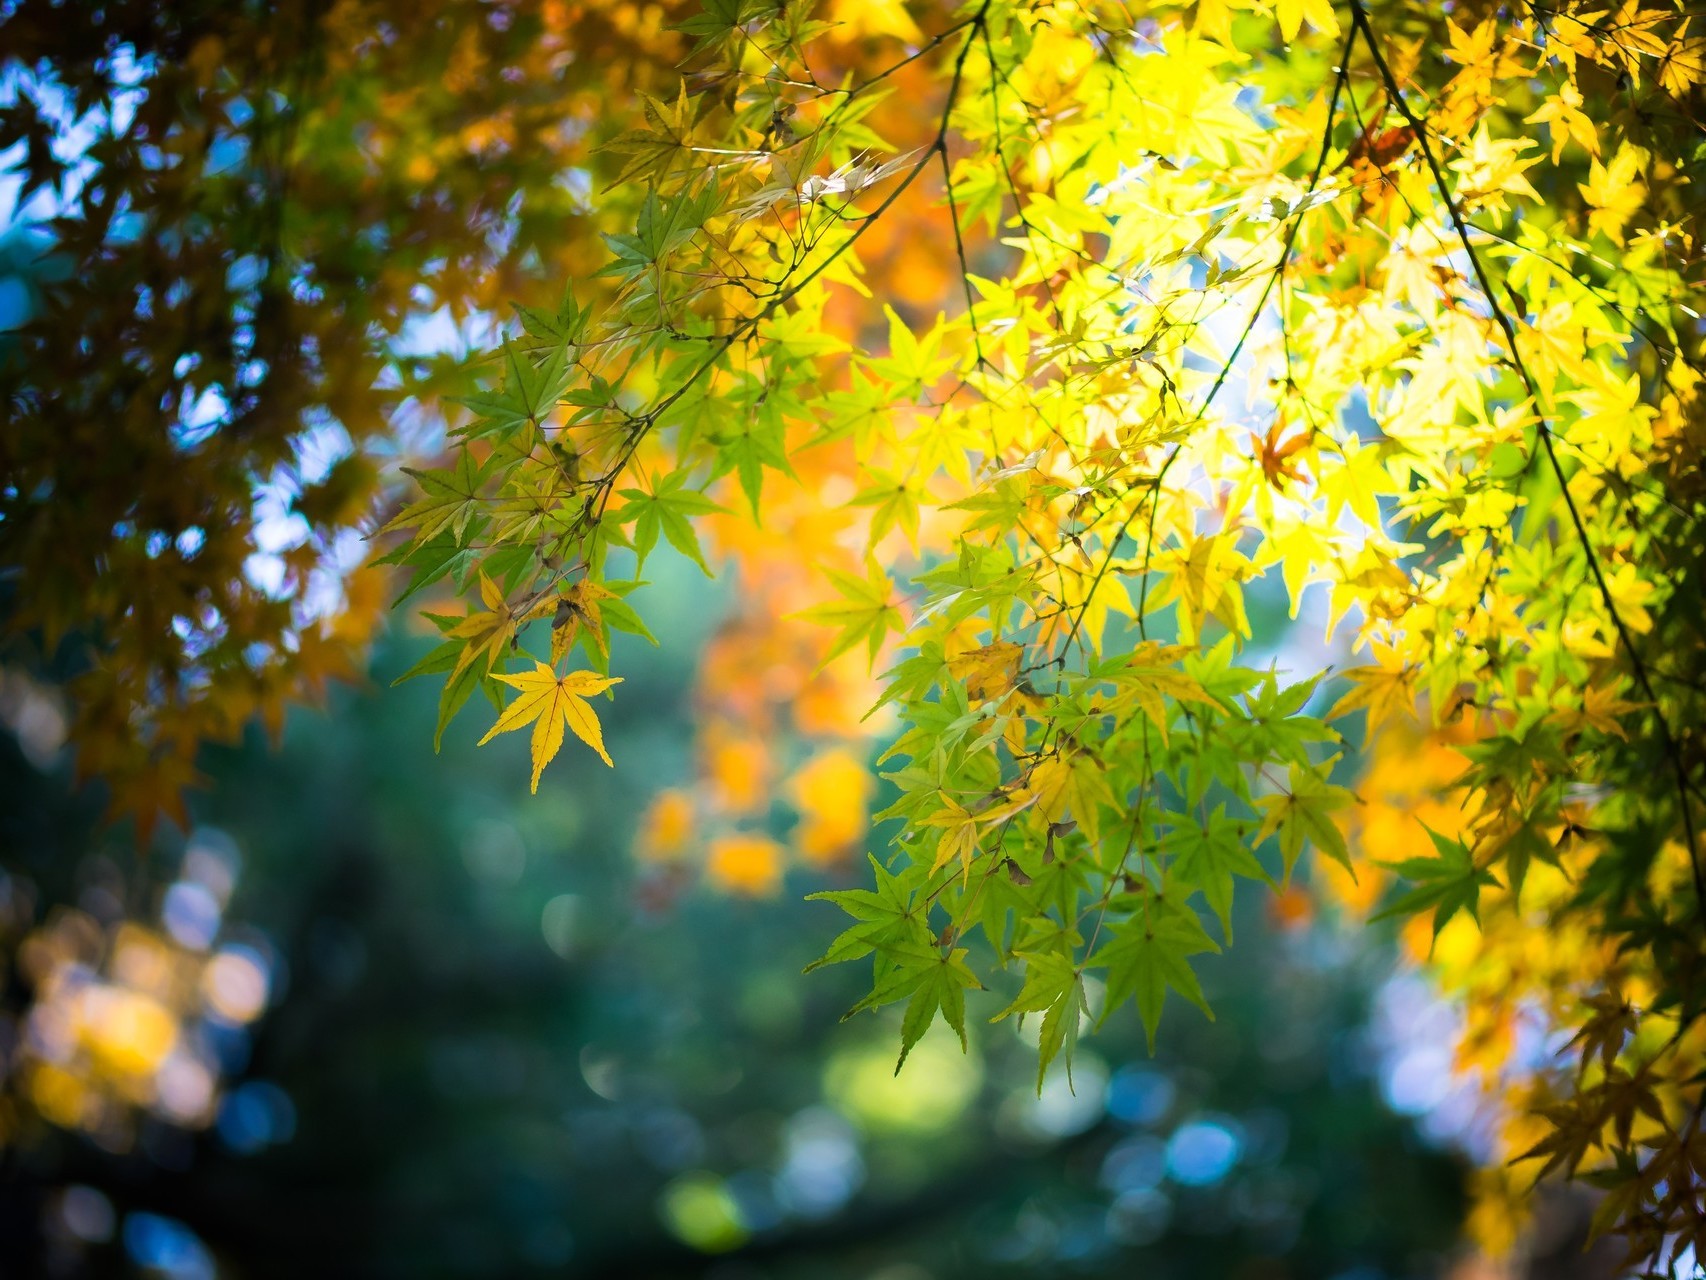 Wallpaper, sunlight, forest, fall, nature, branch, green, yellow, bokeh, maple leaves, light, tree, autumn, leaf, season, land plant, flowering plant, woody plant, 1706x1280 px 1706x1280